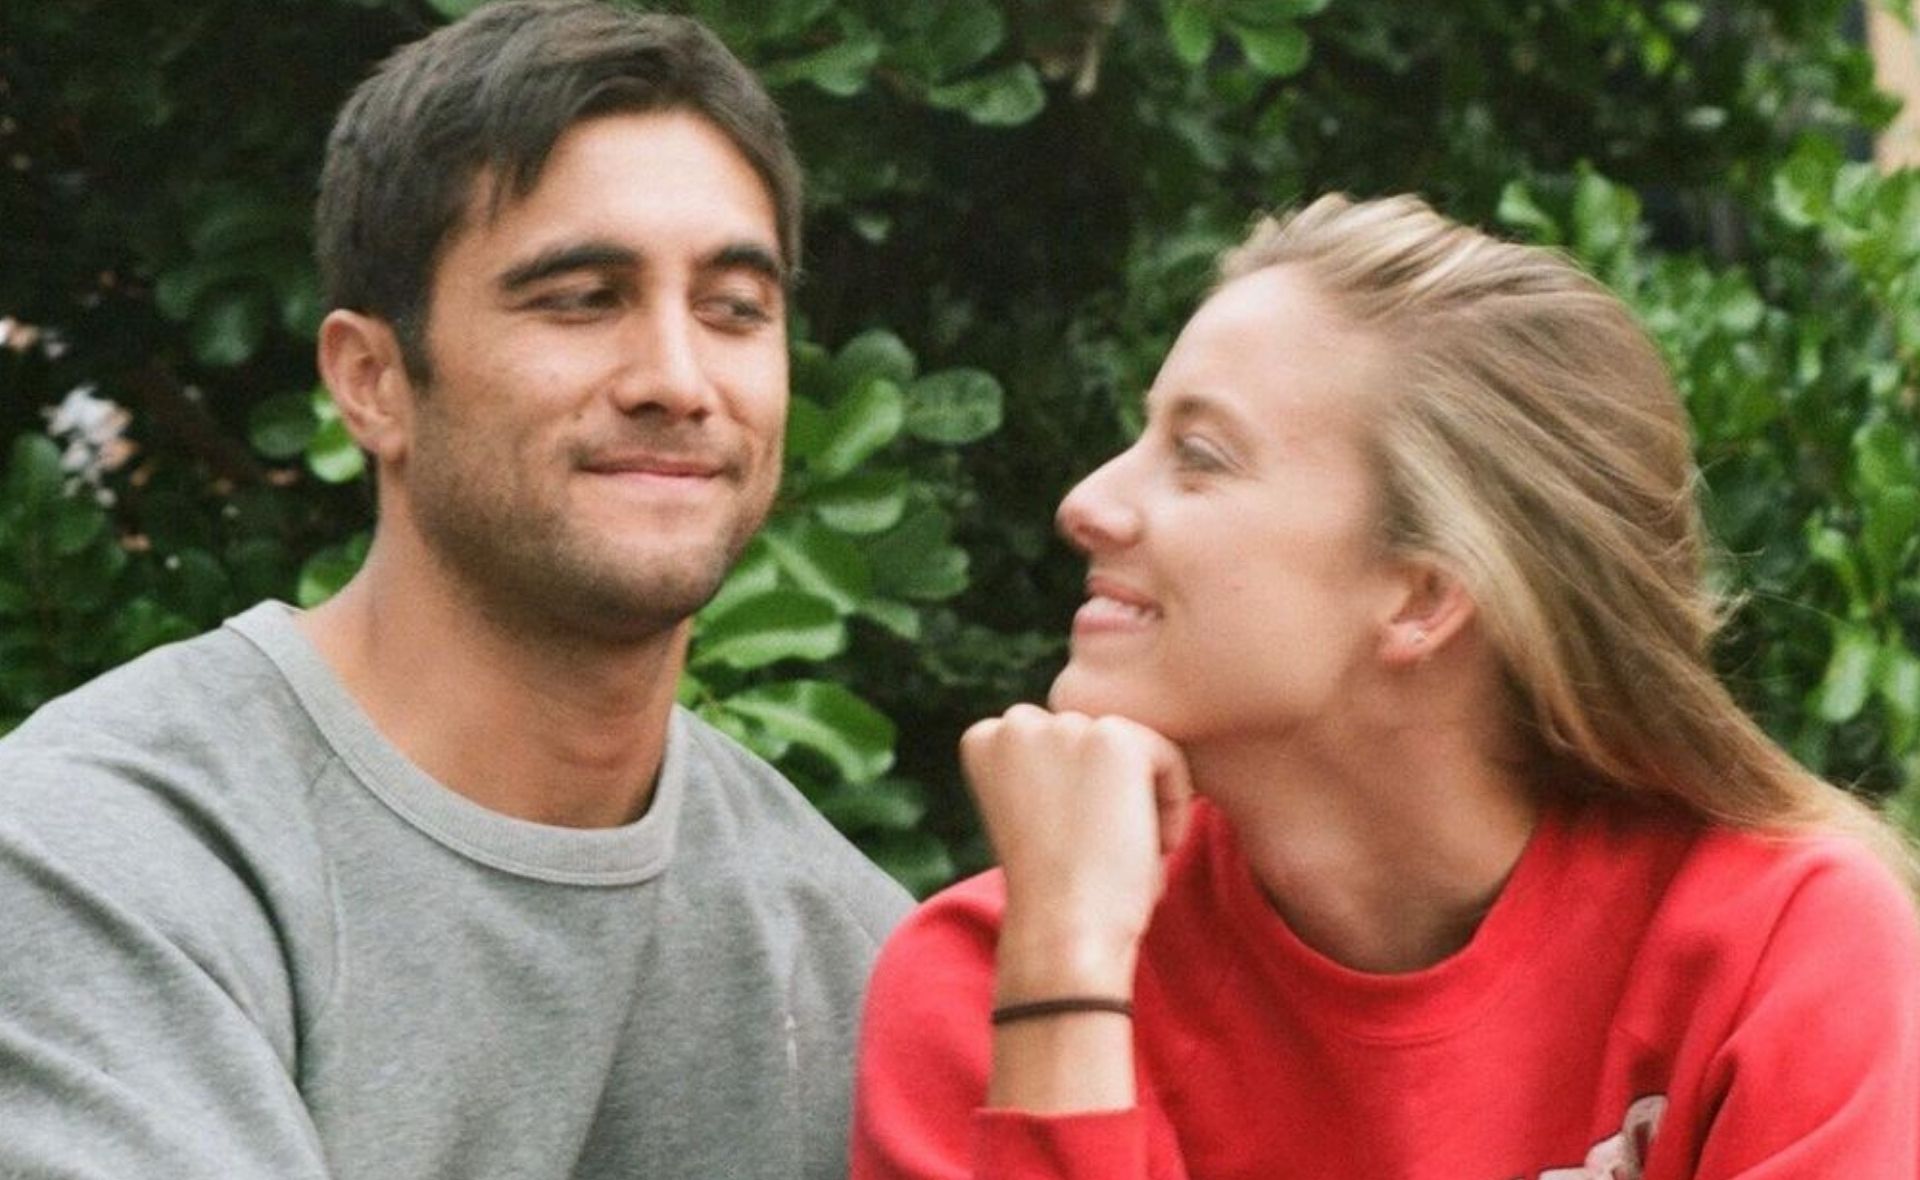 Another Home and Away on-set friendship? Ethan Browne and Jacqui Purvis gush over each other on set